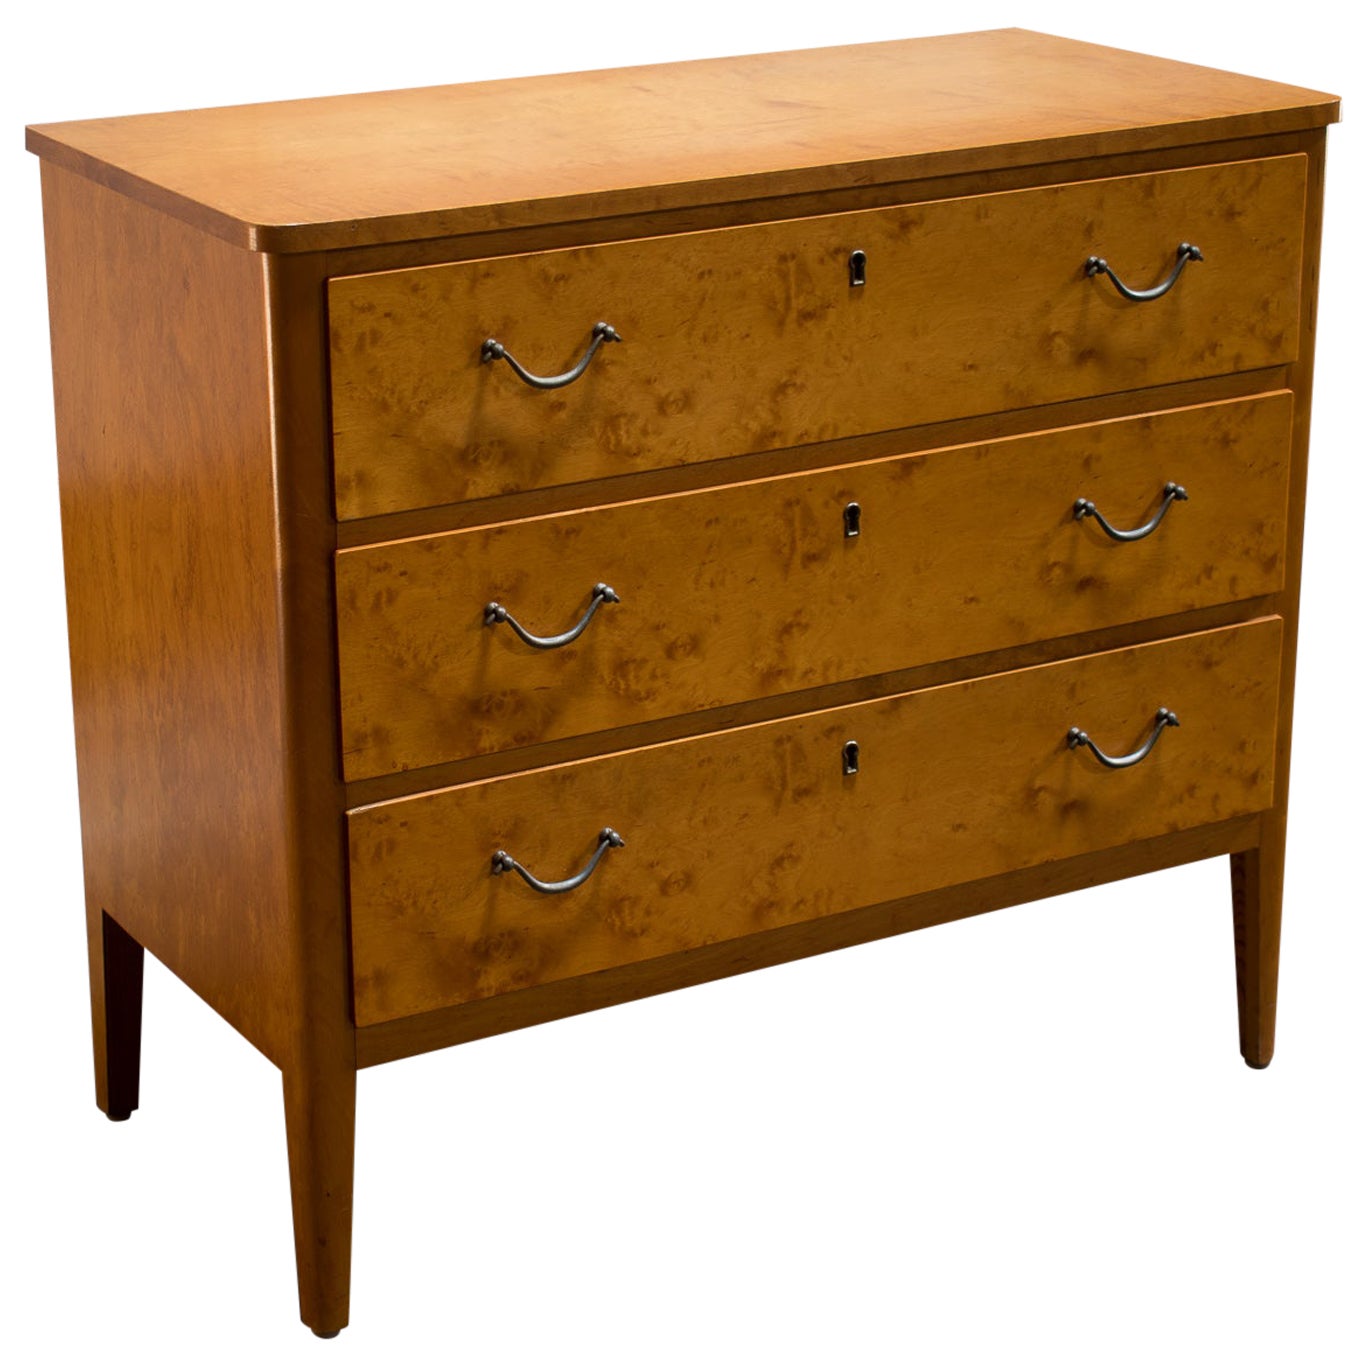 Midcentury Swedish Chest of Drawers in Blond Birch For Sale